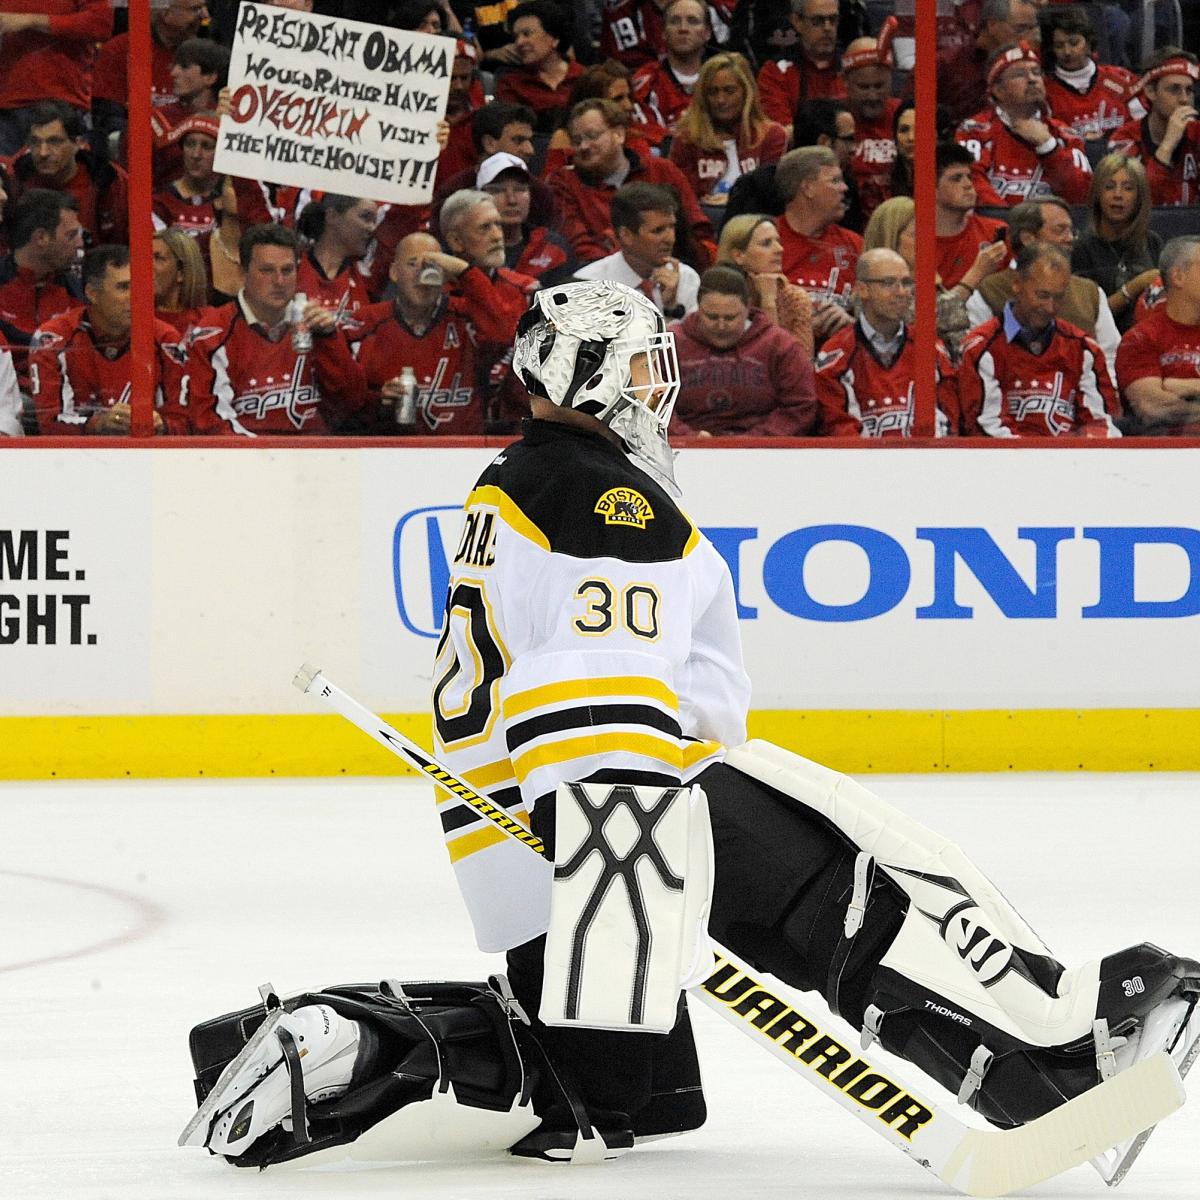 Nhl Playoffs 2012 Loose Attitude Will Key Boston Bruins Victory Over